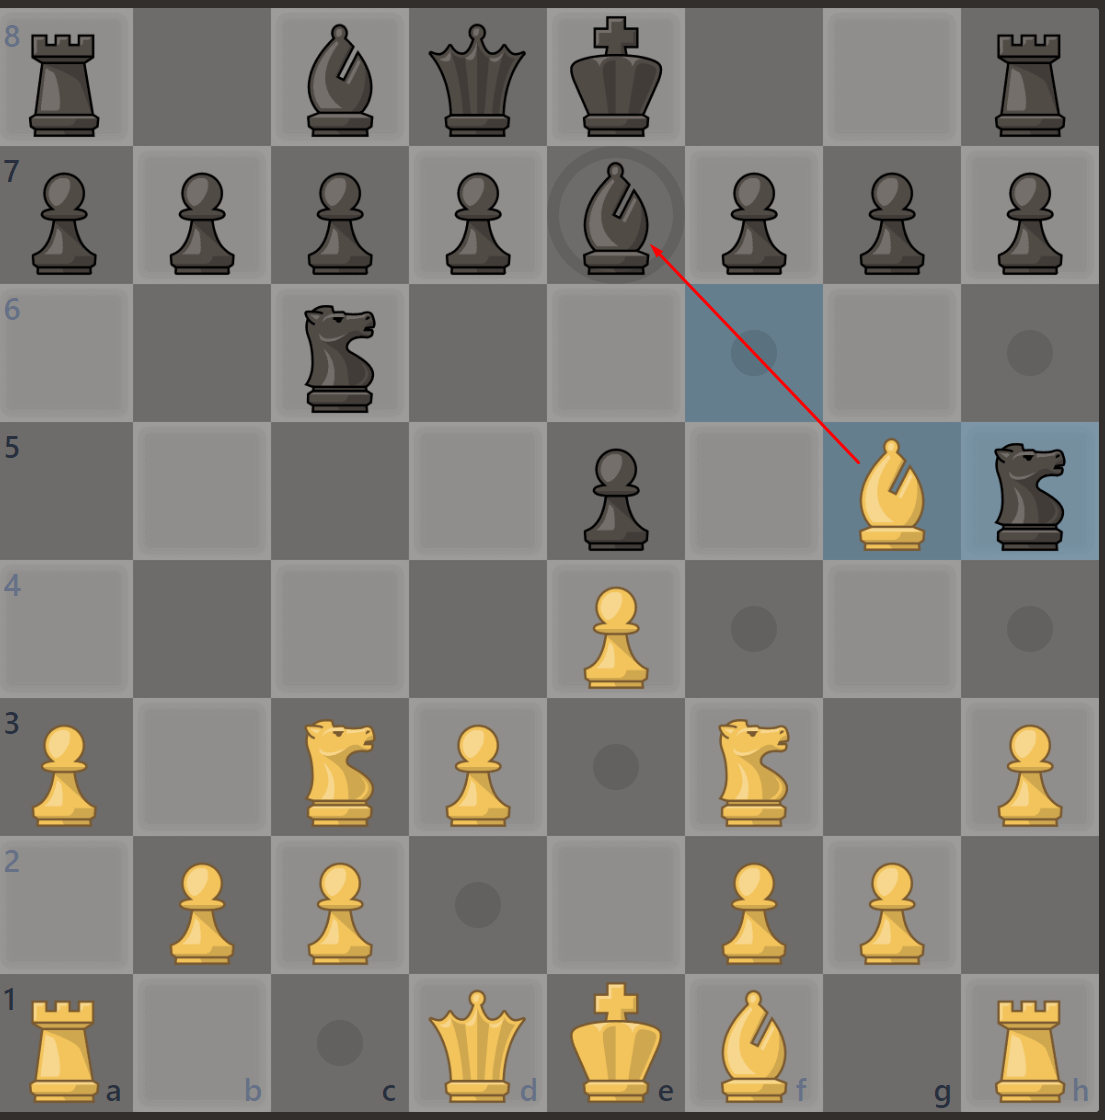 Why is this a great move? - Chess Forums 